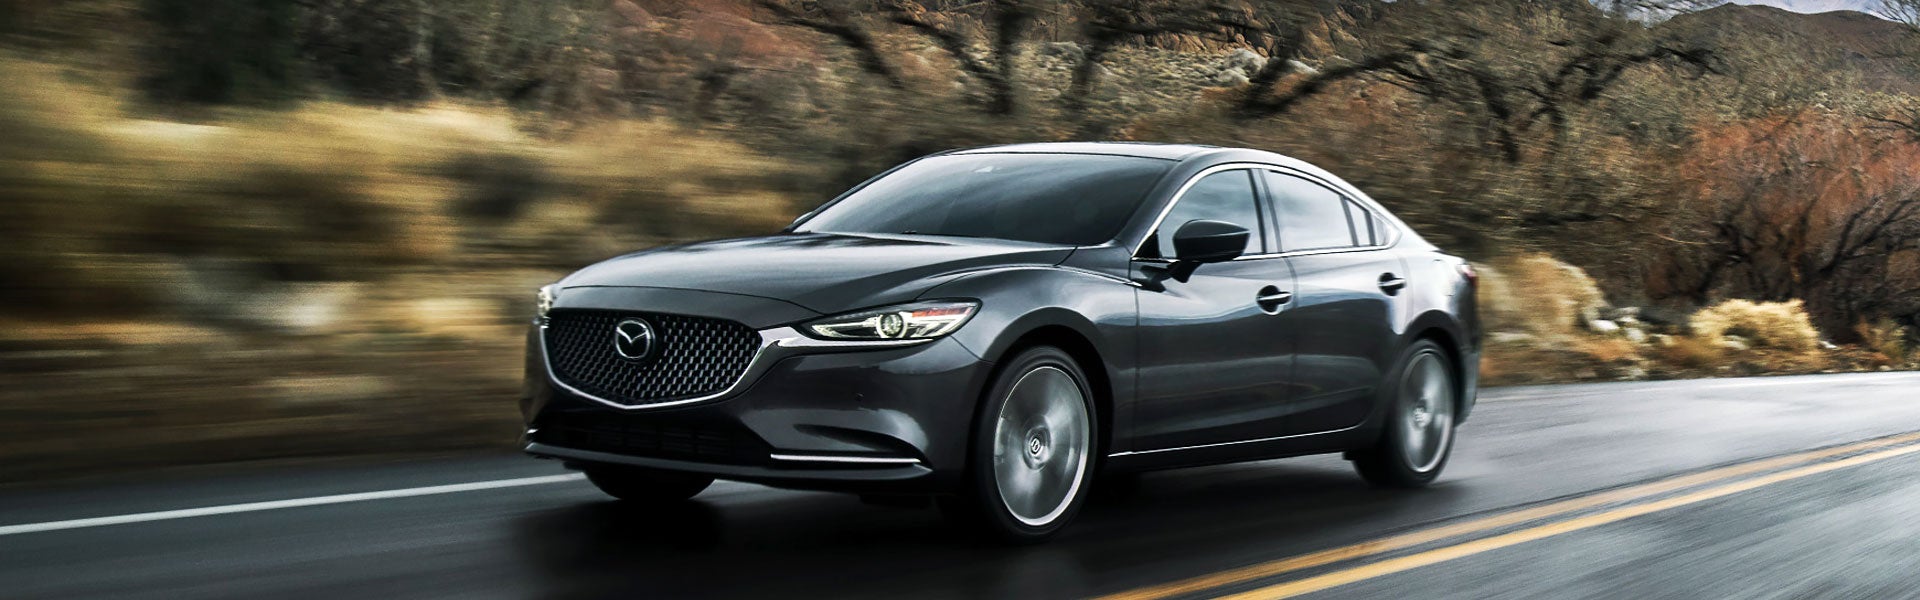 Differences Between the 2020 Mazda6 Touring and 2020 Mazda6 Grand Touring -  Flood Mazda Blog